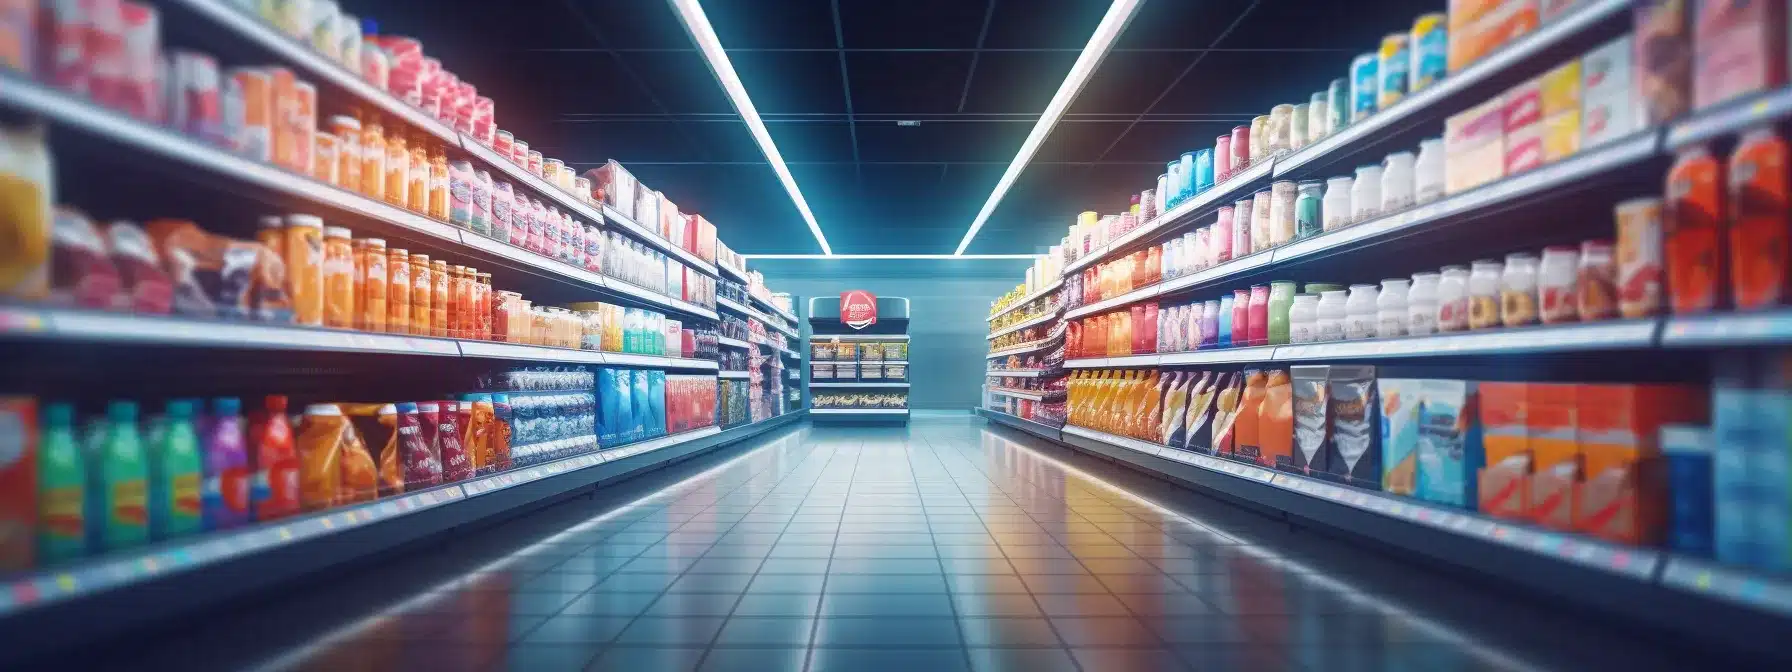 A Grocery Store Aisle Filled With Visually Appealing Product Packaging, Each Vying For The Attention Of Shoppers.